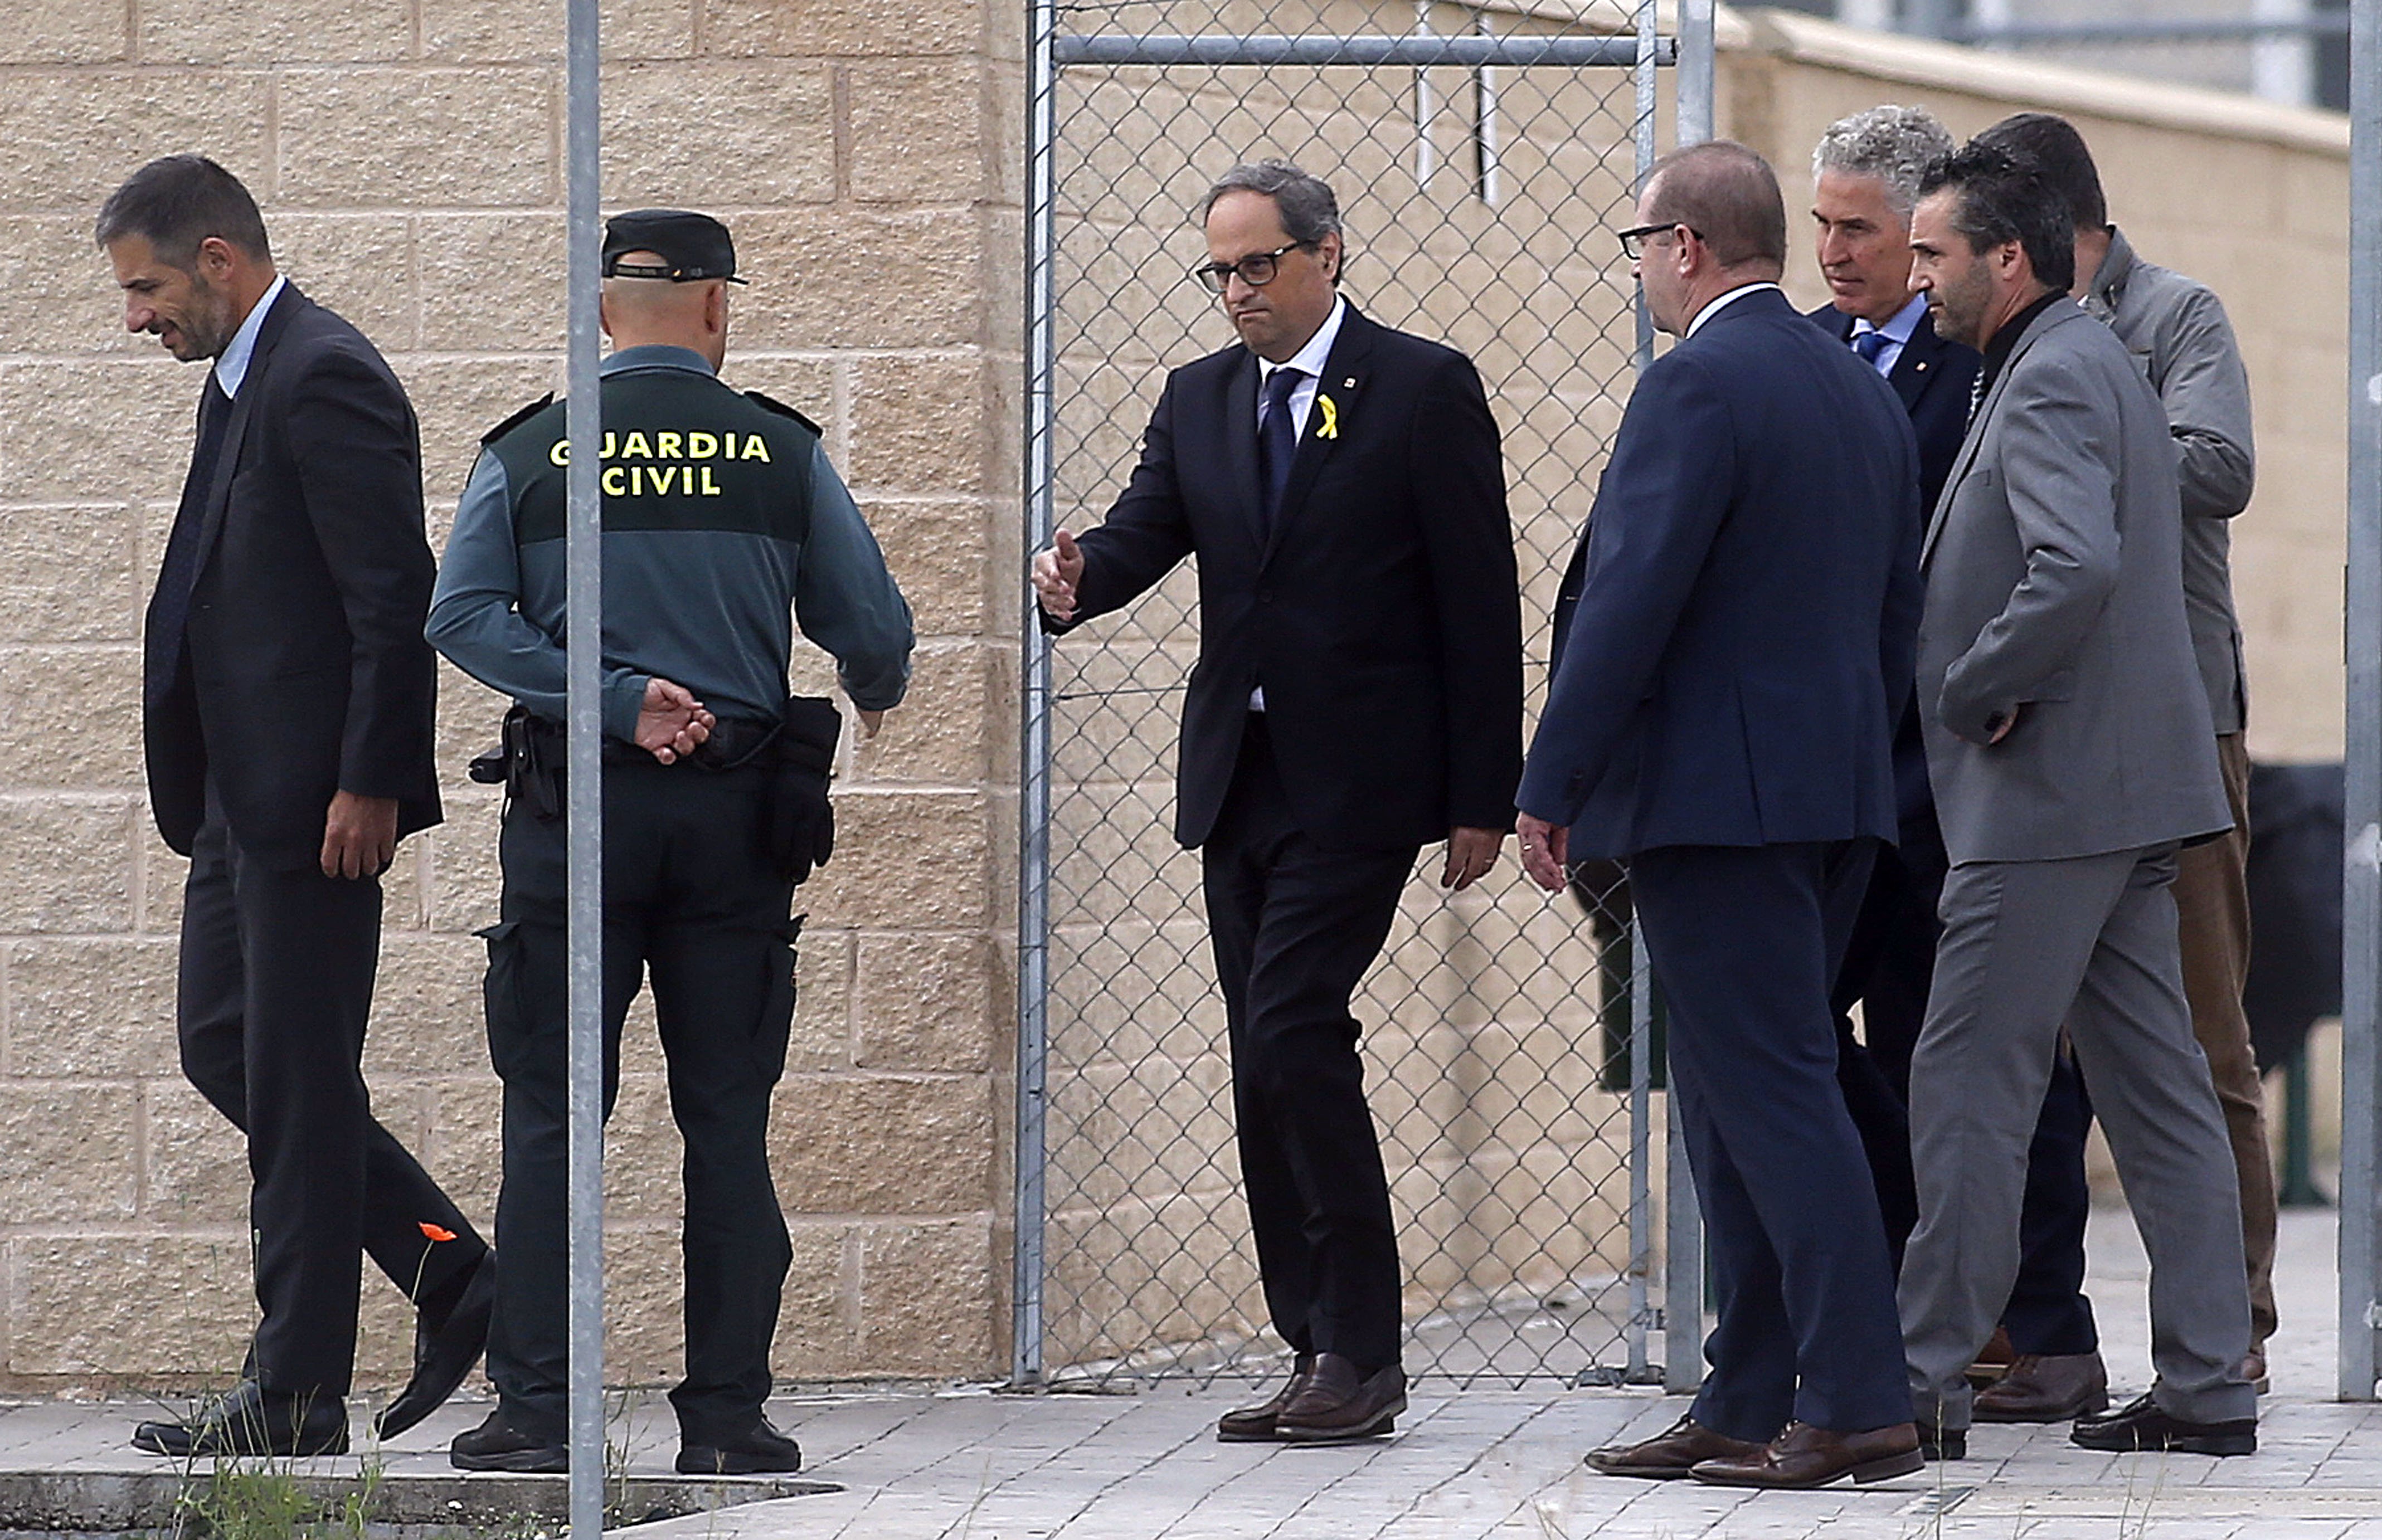 Torra visits Catalan leaders held in Madrid jails: "We are waiting for you"